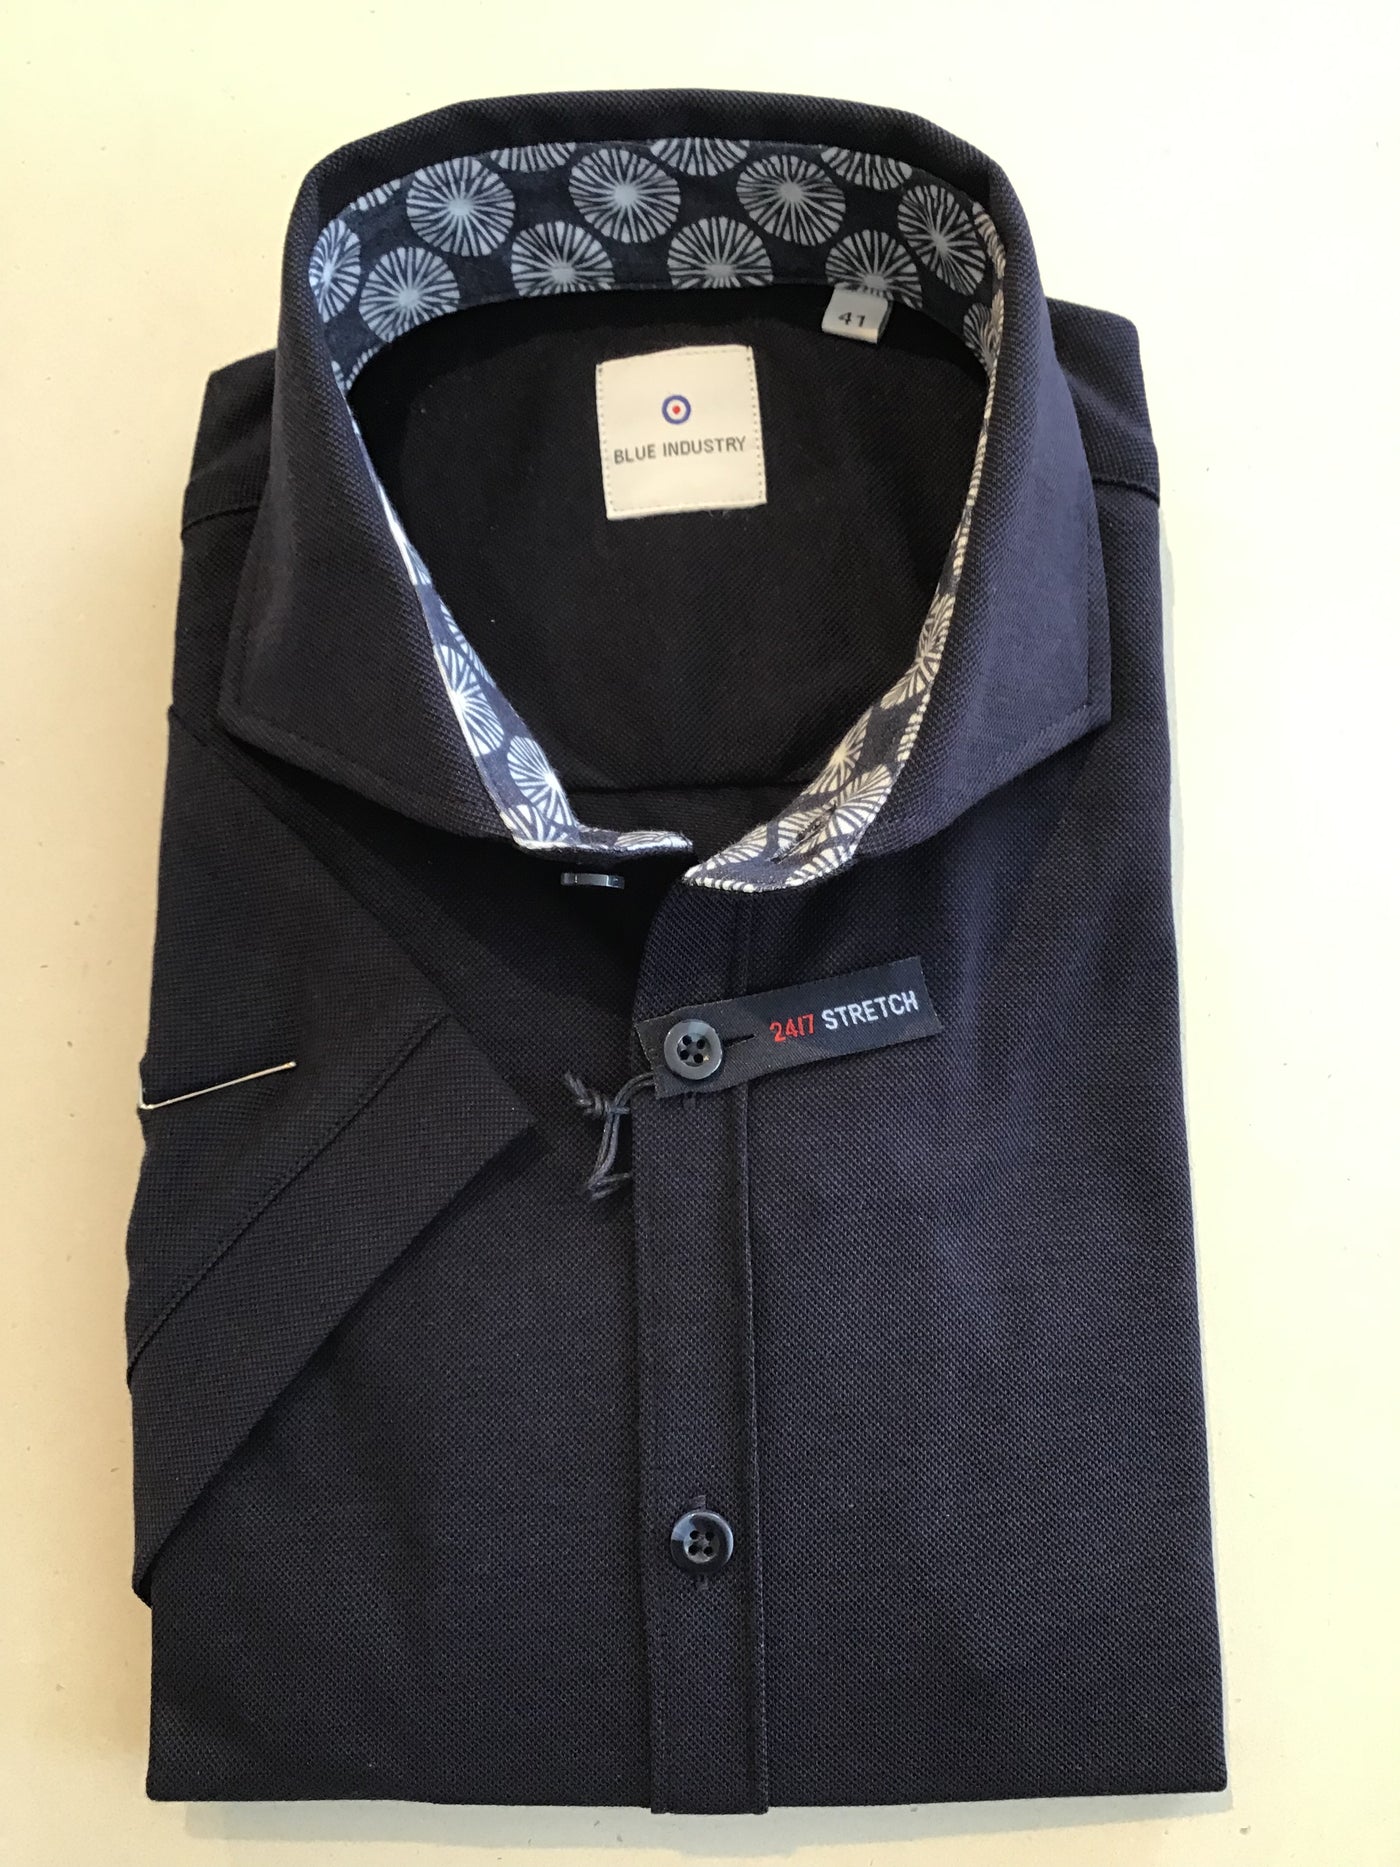 BLUE INDUSTRY SS basic cotton Navy